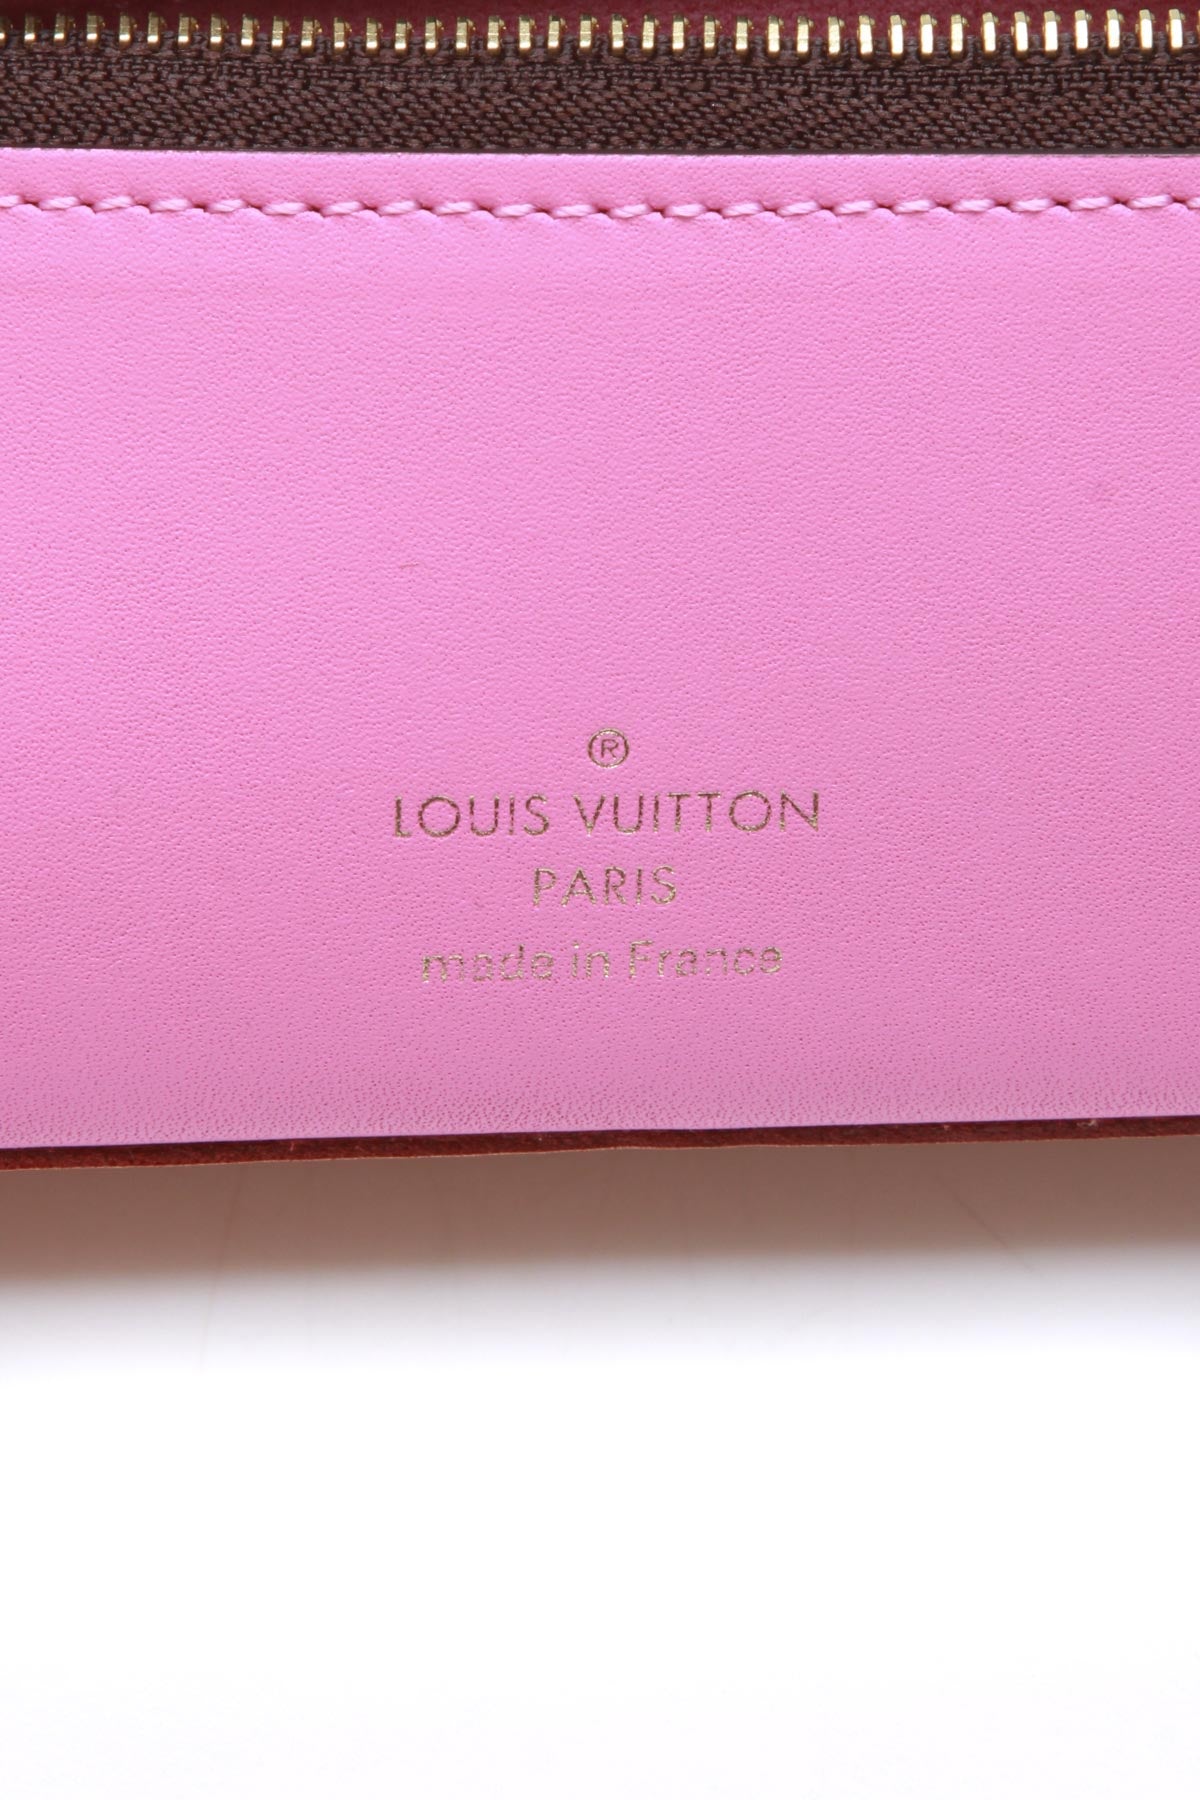 LOUIS VUITTON CARD HOLDER REVIEW  COMPARISONS MADE IN(***SPAIN vs  FRANCE***) 